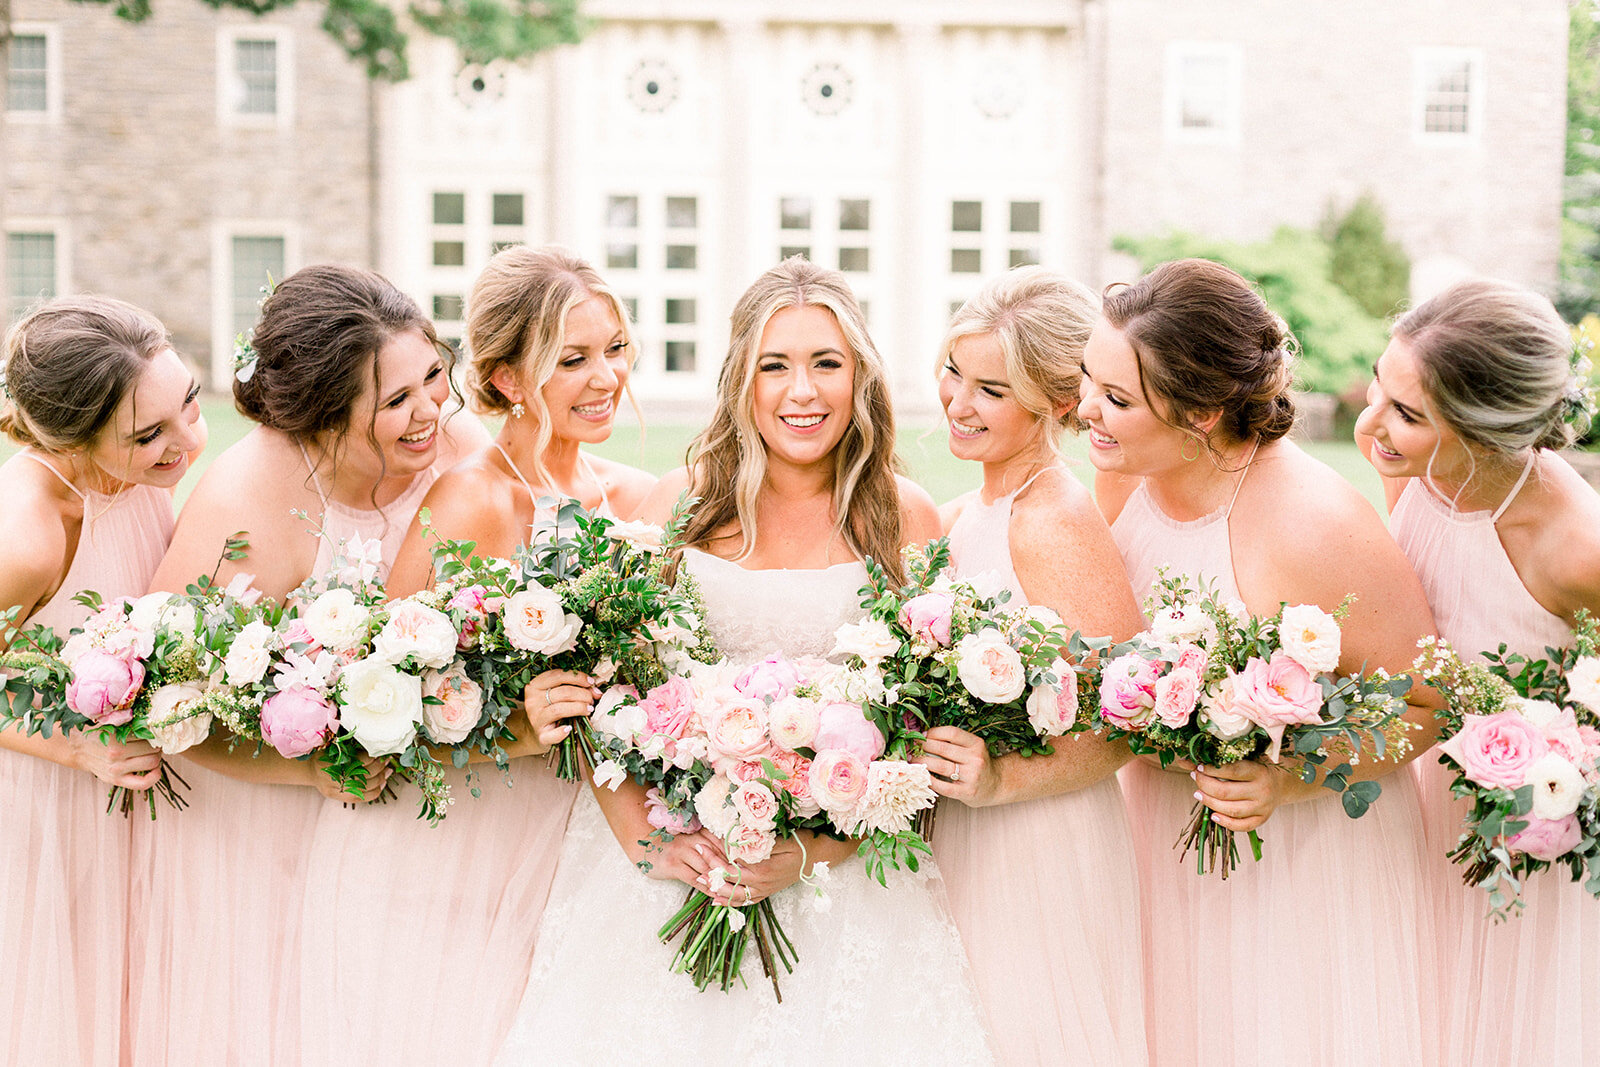 A lush bridal bouquet filled with hues of blush, pink, and ivory. Garden roses, majolica spray roses, champagne roses, peonies, picotee ranunculus, and spirea make up this fairytale bouquet. Designed by Rosemary & Finch in Nashville, TN.